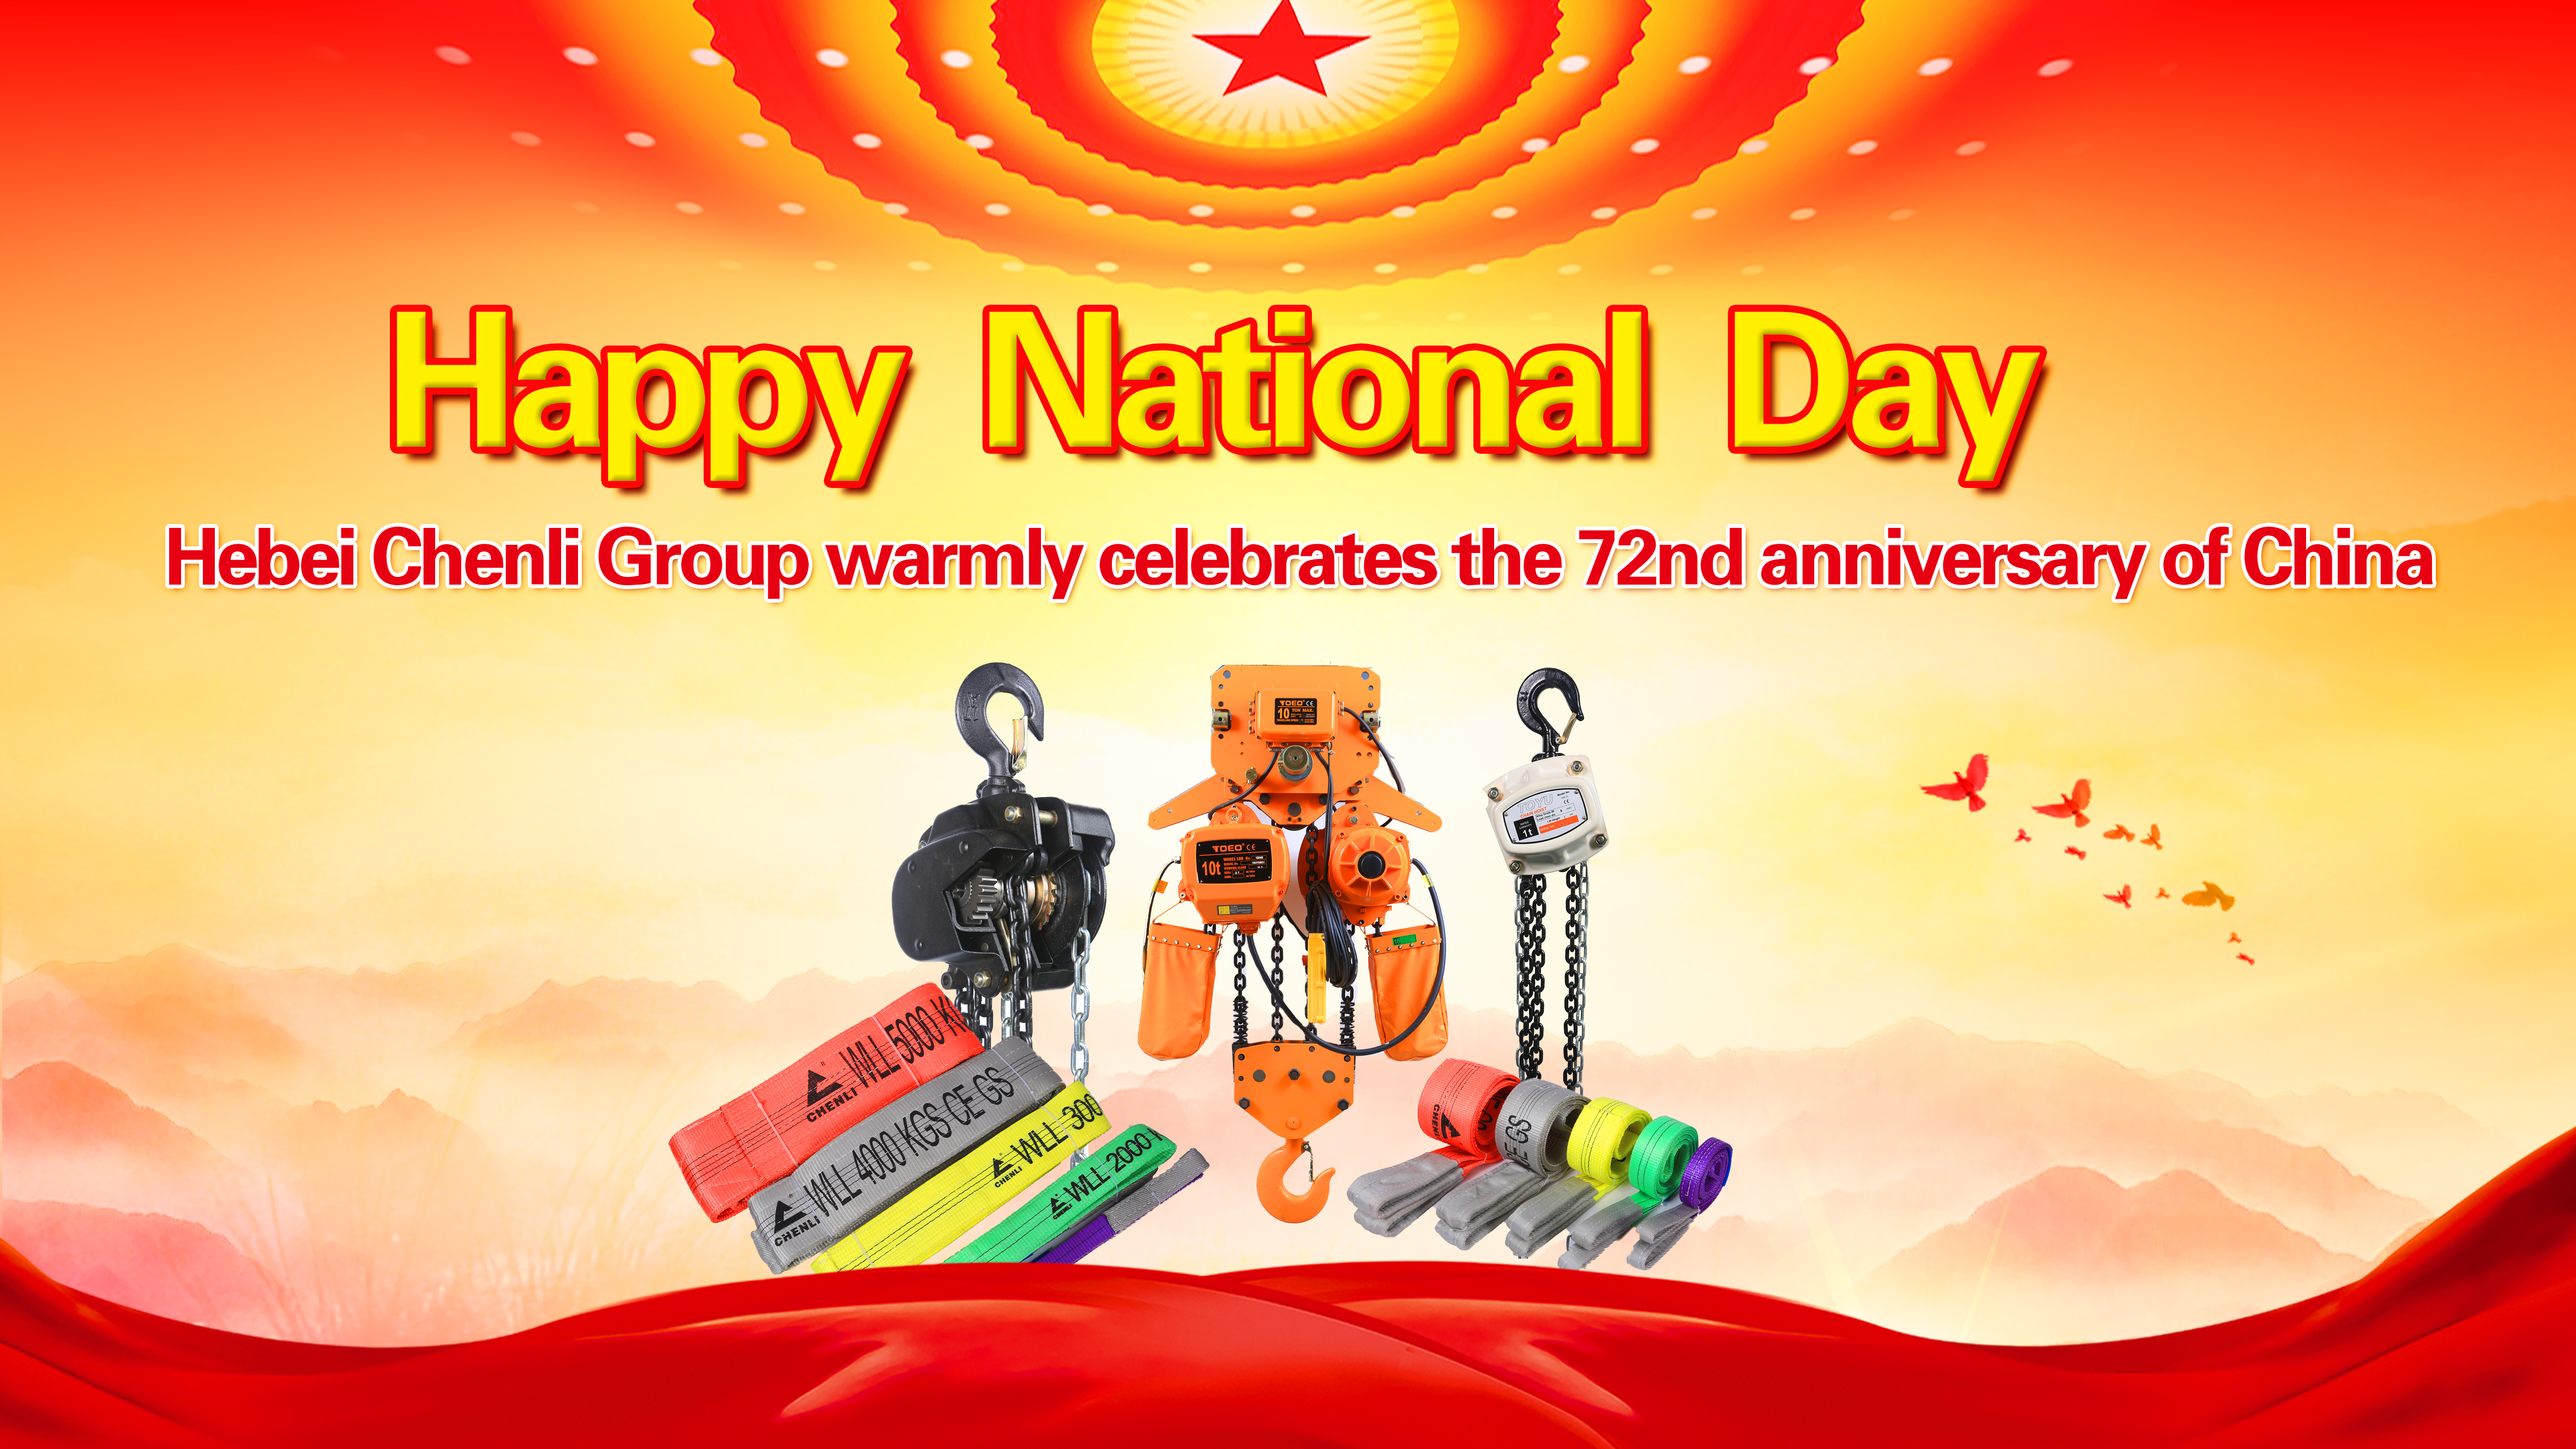 Happy National Day ,Hebei Chenli Group warmly celebrates the 72nd anniversary of China .